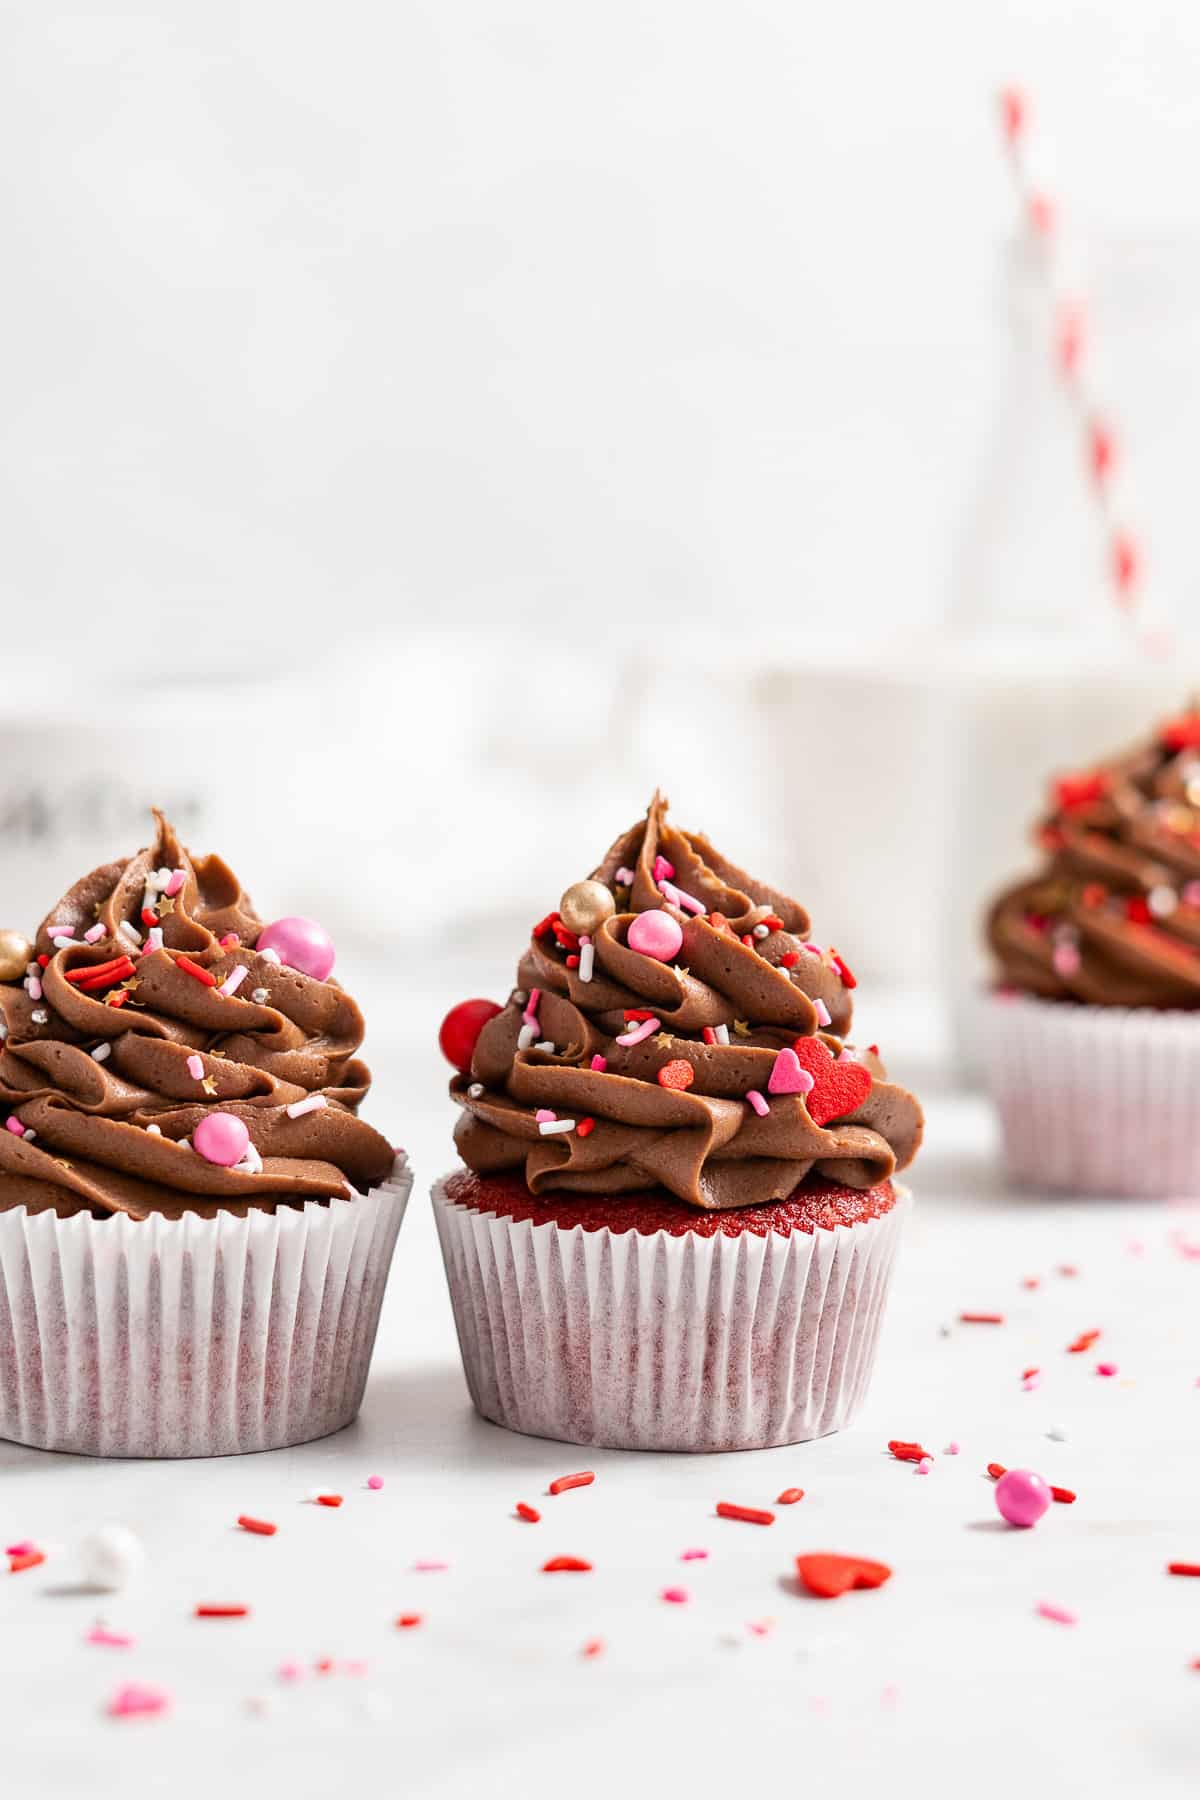 Three red velvet cupcakes with chocolate frosting and Valentine's Day sprinkles.